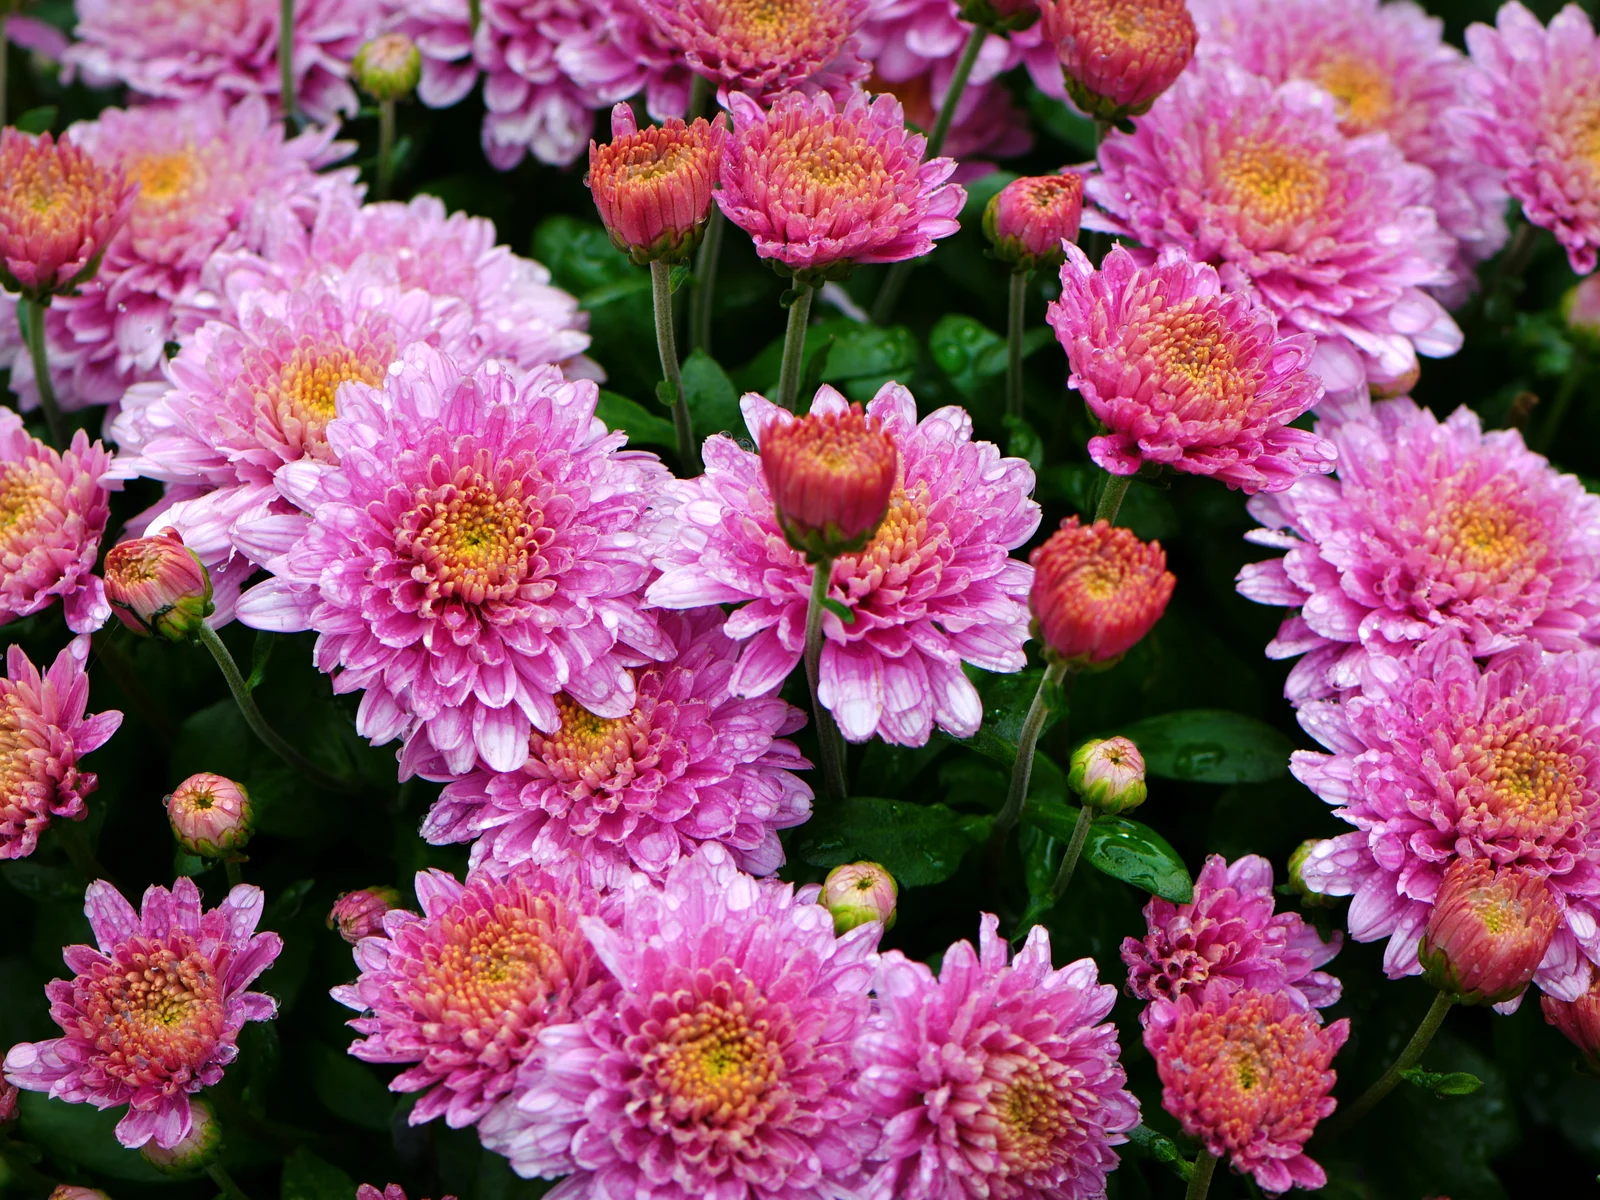 Gorgeous flowers and buds of Purple Chrysanthemums at a botanical garden, one of the best things to do in Asheville, NC